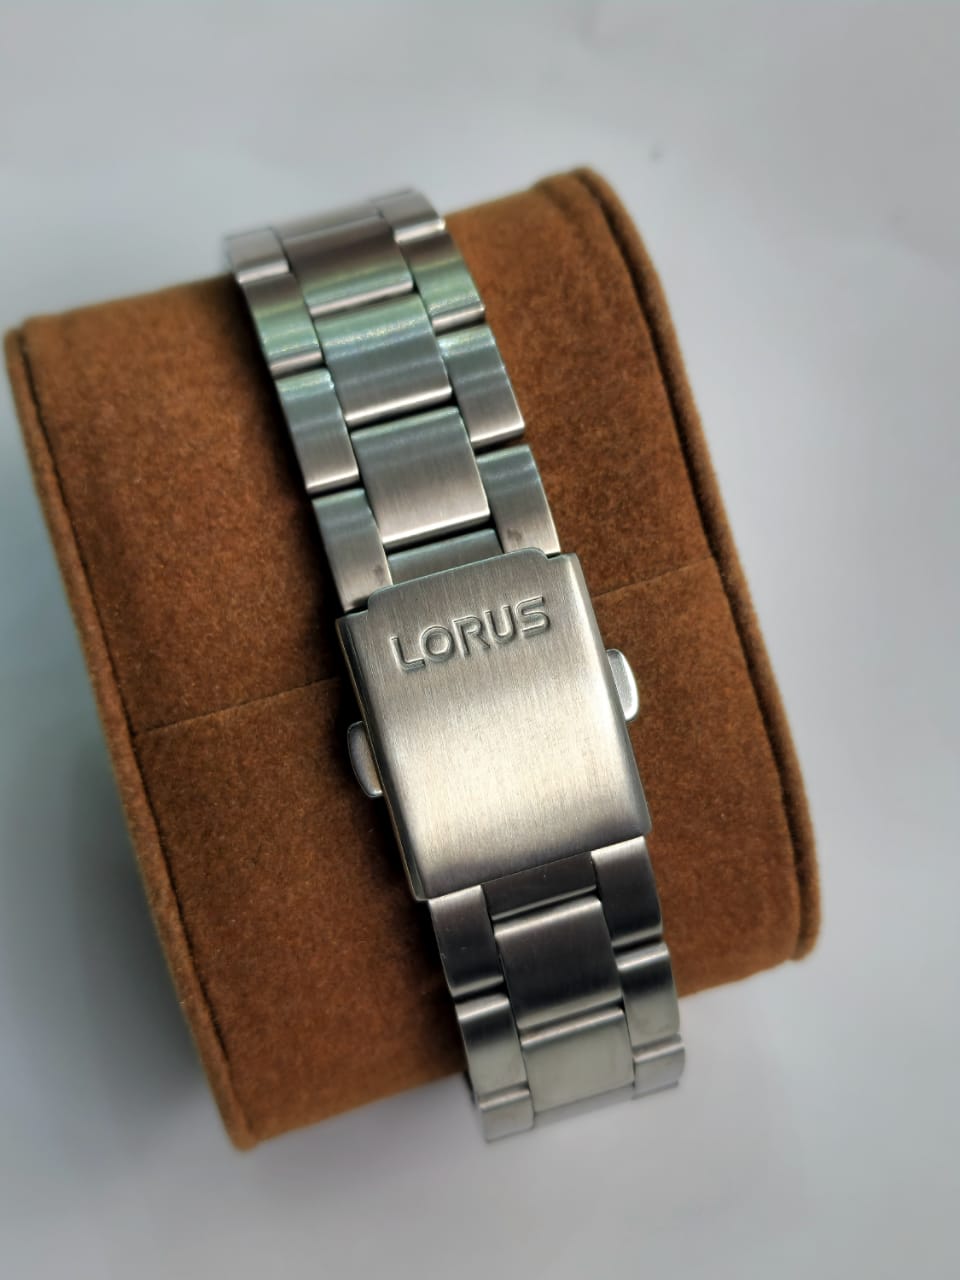 Lorus Sub Brand Of Seiko Stainless Steel Gents Watch 40mm Dial Size